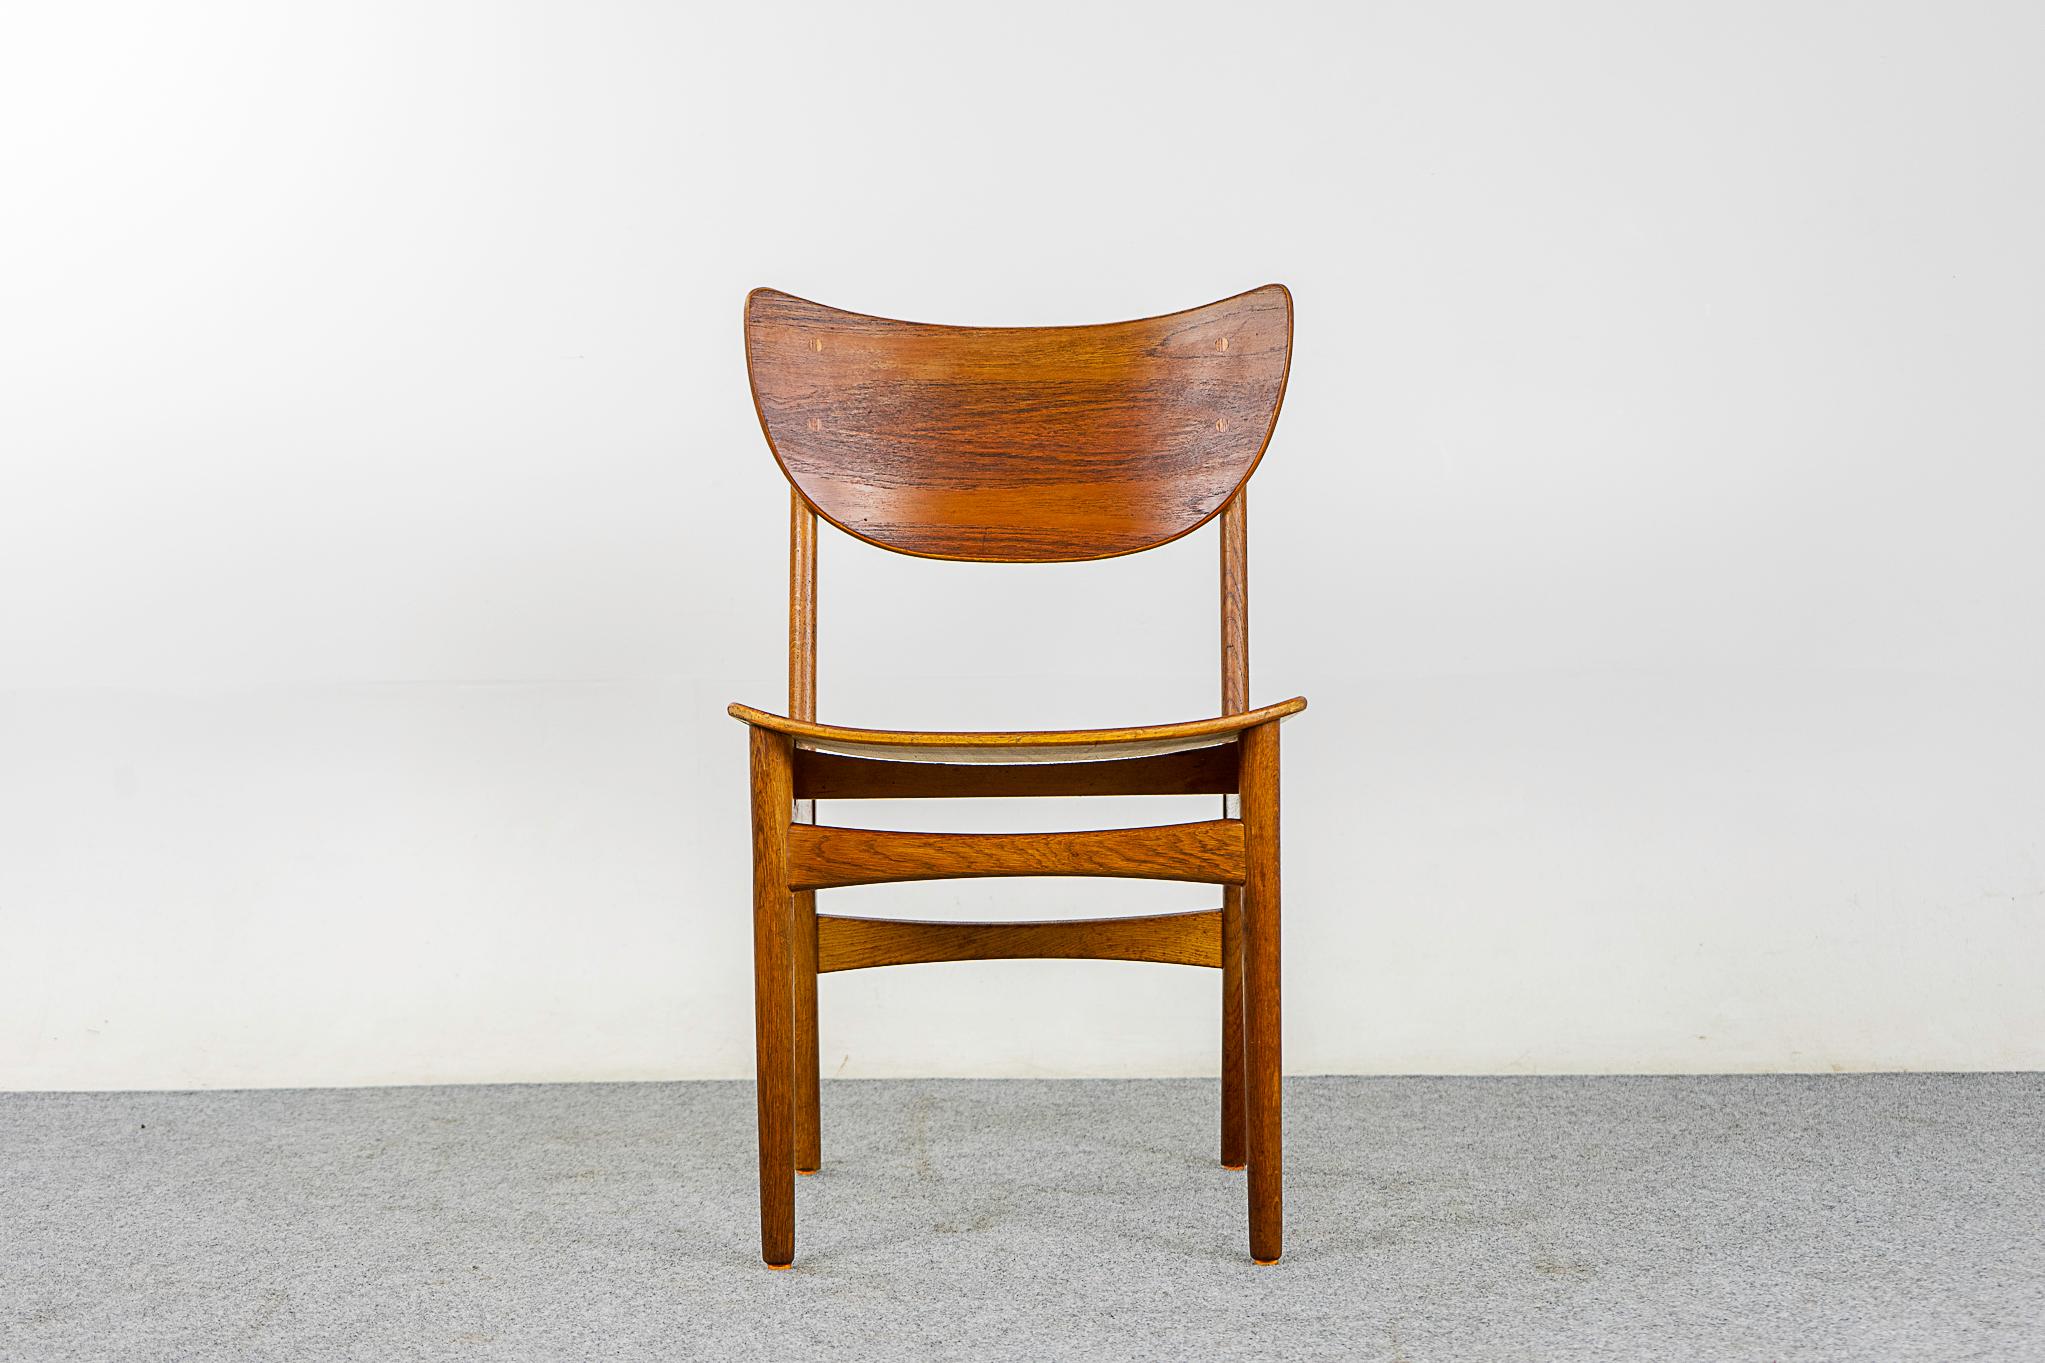 Teak & oak Danish chair, circa 1960's. Beautifully curved teak backrests and generous seat provides support and comfort. Solid oak legs with cross braces, for added stability!

Please inquire for remote and international shipping rates.